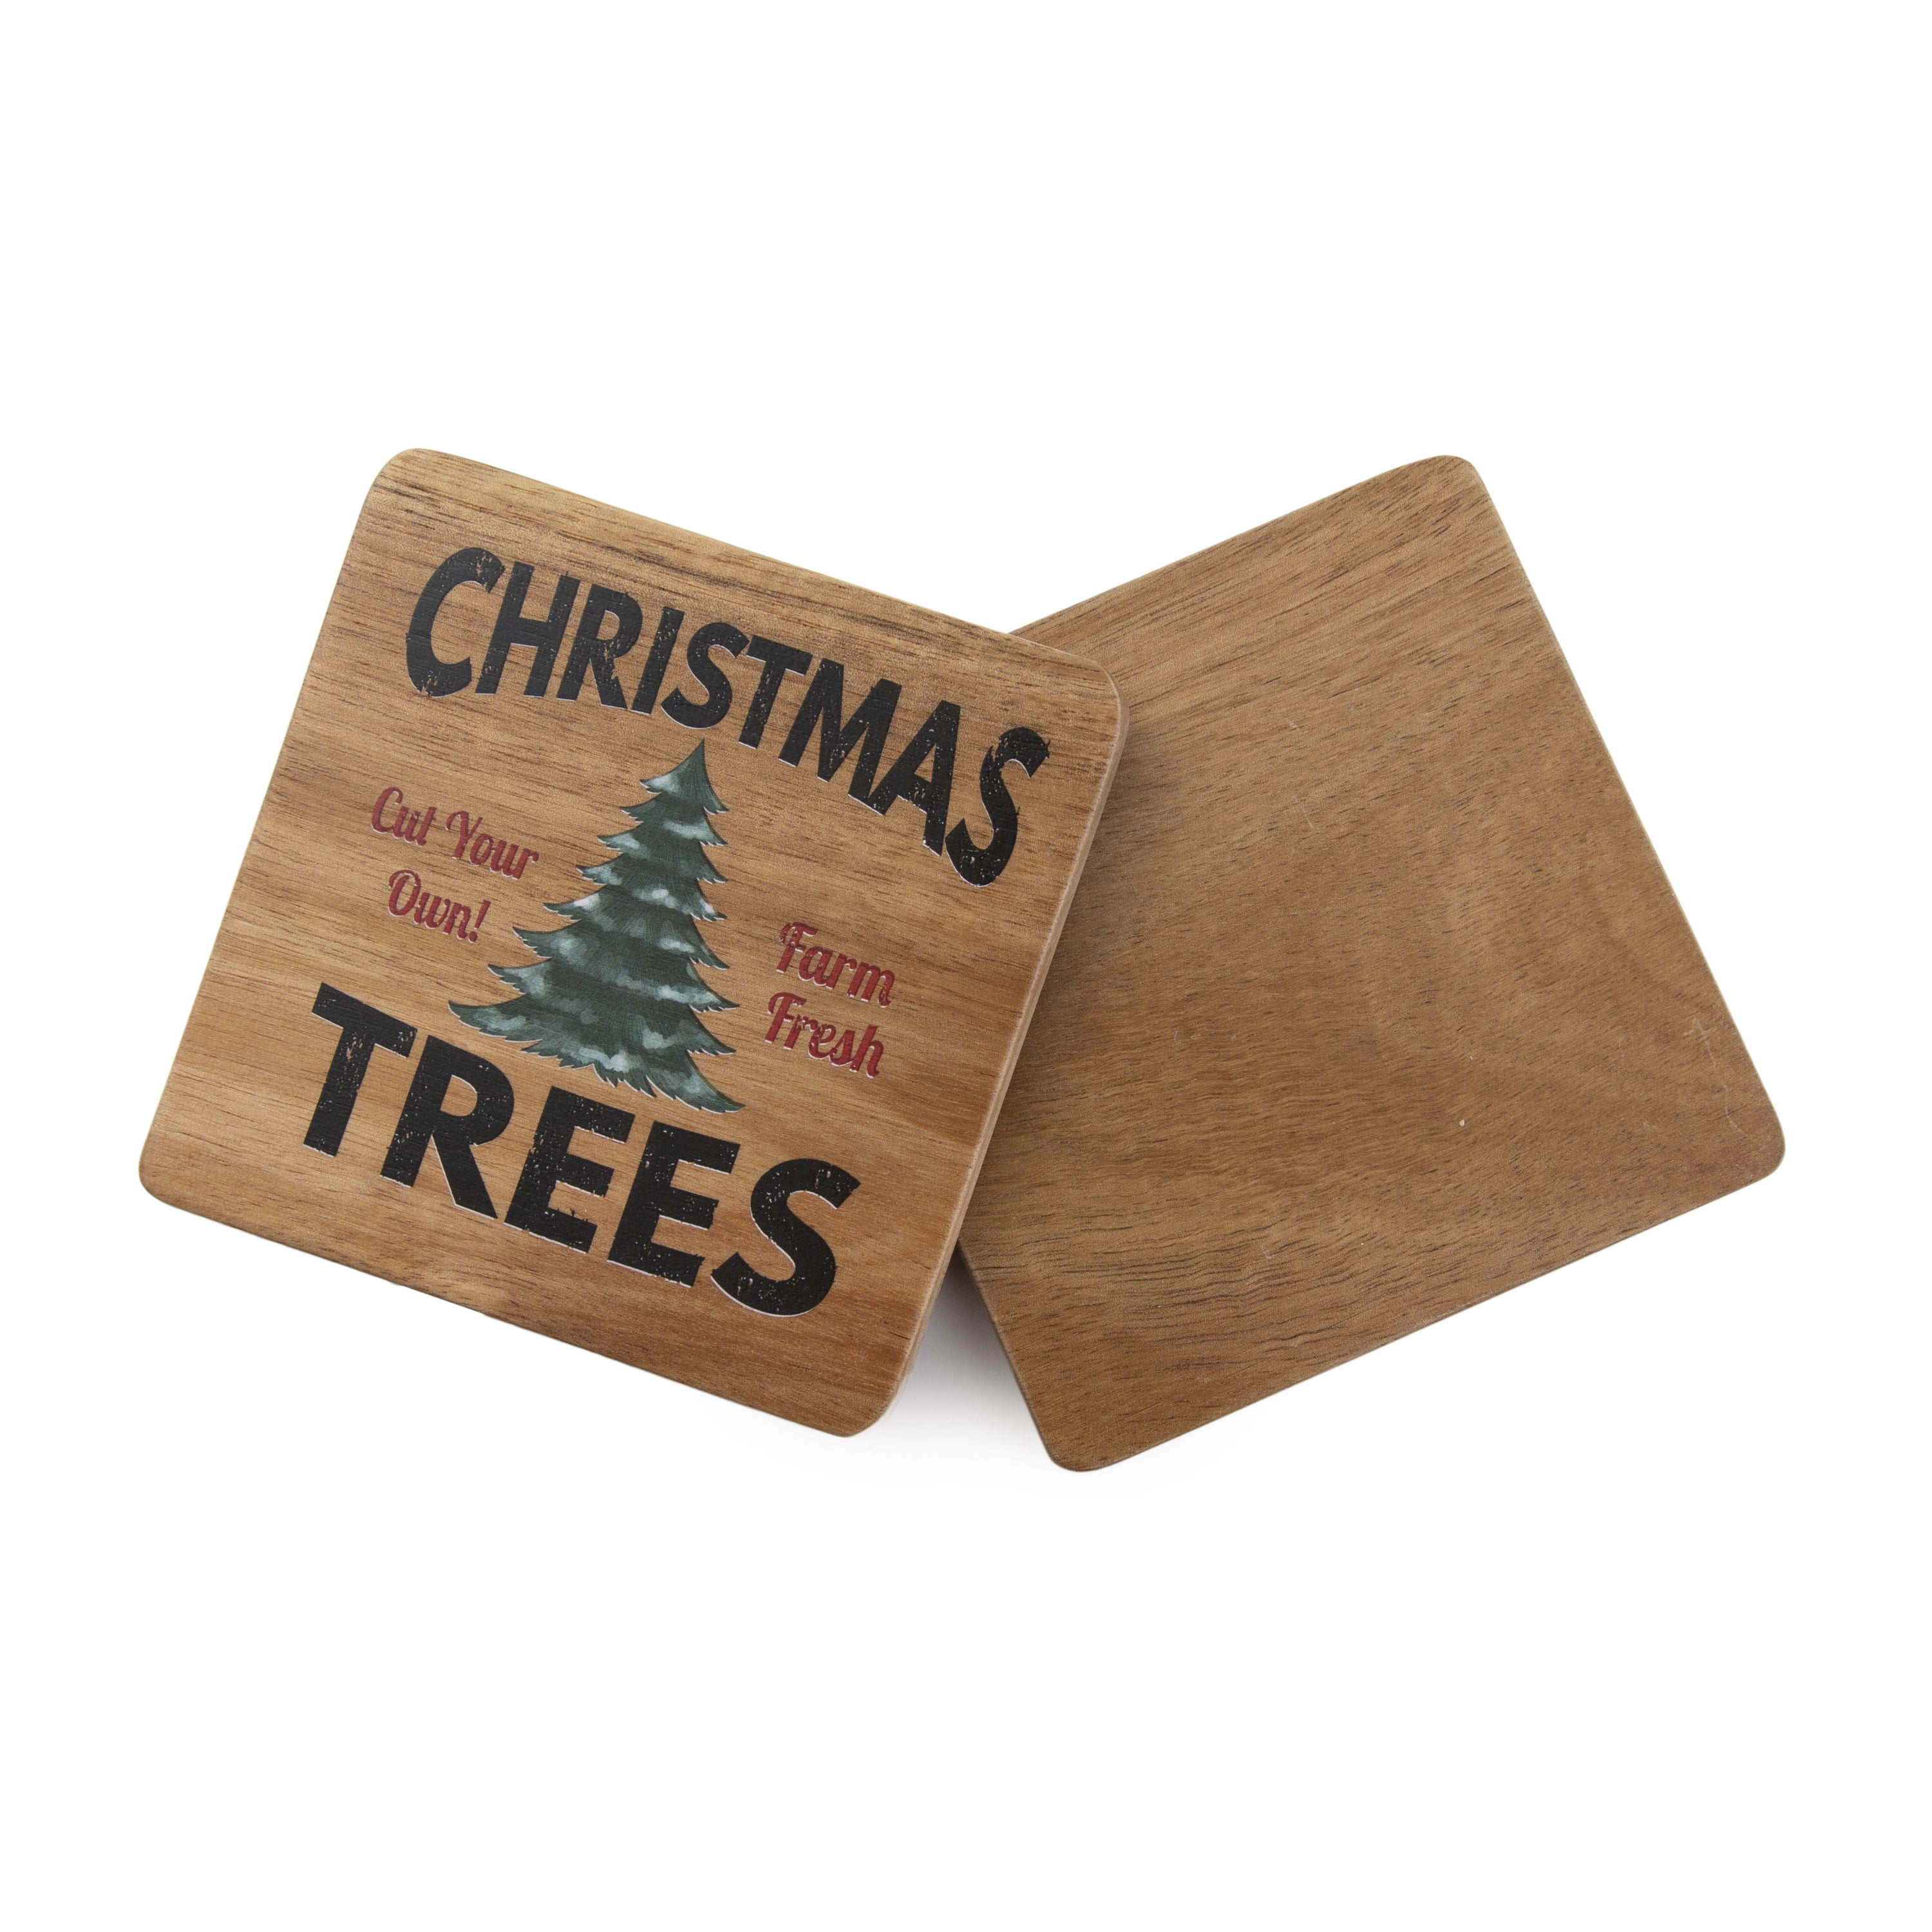 How to Make Wood Coasters From Your Christmas Tree